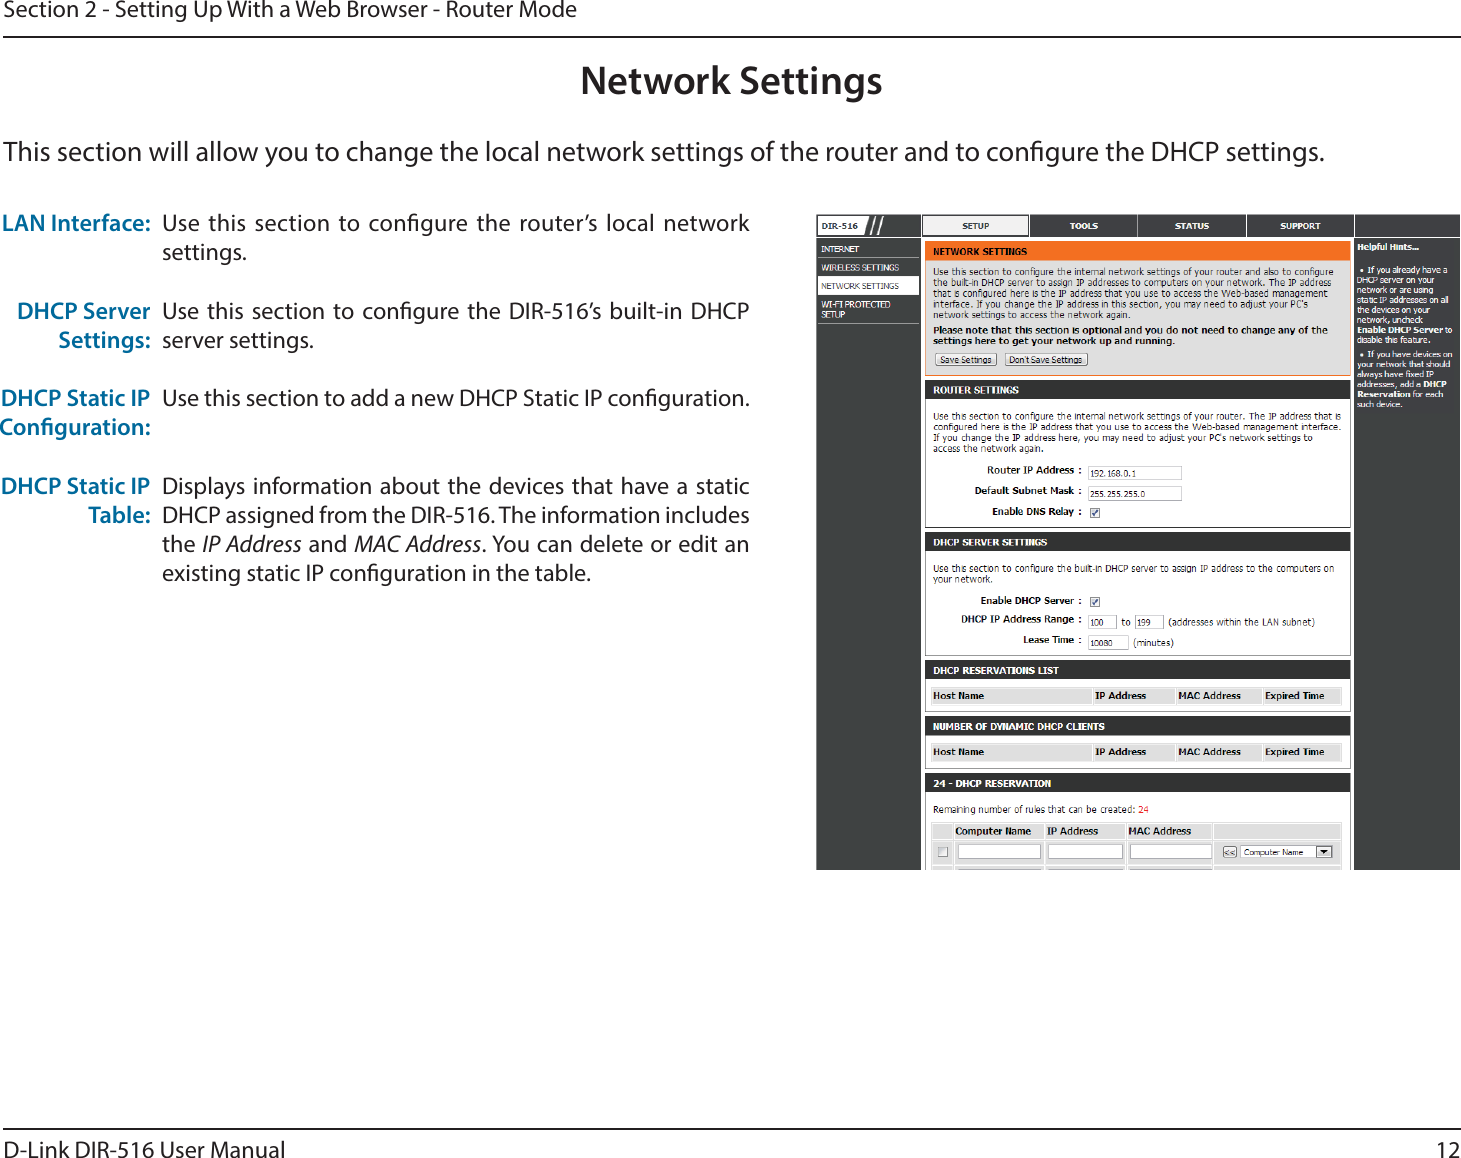 12D-Link DIR-516 User ManualSection 2 - Setting Up With a Web Browser - Router ModeThis section will allow you to change the local network settings of the router and to congure the DHCP settings.Network SettingsUse this section to congure the router’s local network settings.Use this section to congure the DIR-516’s built-in DHCP server settings.Use this section to add a new DHCP Static IP conguration.Displays information about the devices that have a static DHCP assigned from the DIR-516. The information includes the IP Address and MAC Address. You can delete or edit an existing static IP conguration in the table.LAN Interface:DHCP Server Settings:DHCP Static IP Conguration:DHCP Static IP Table: 